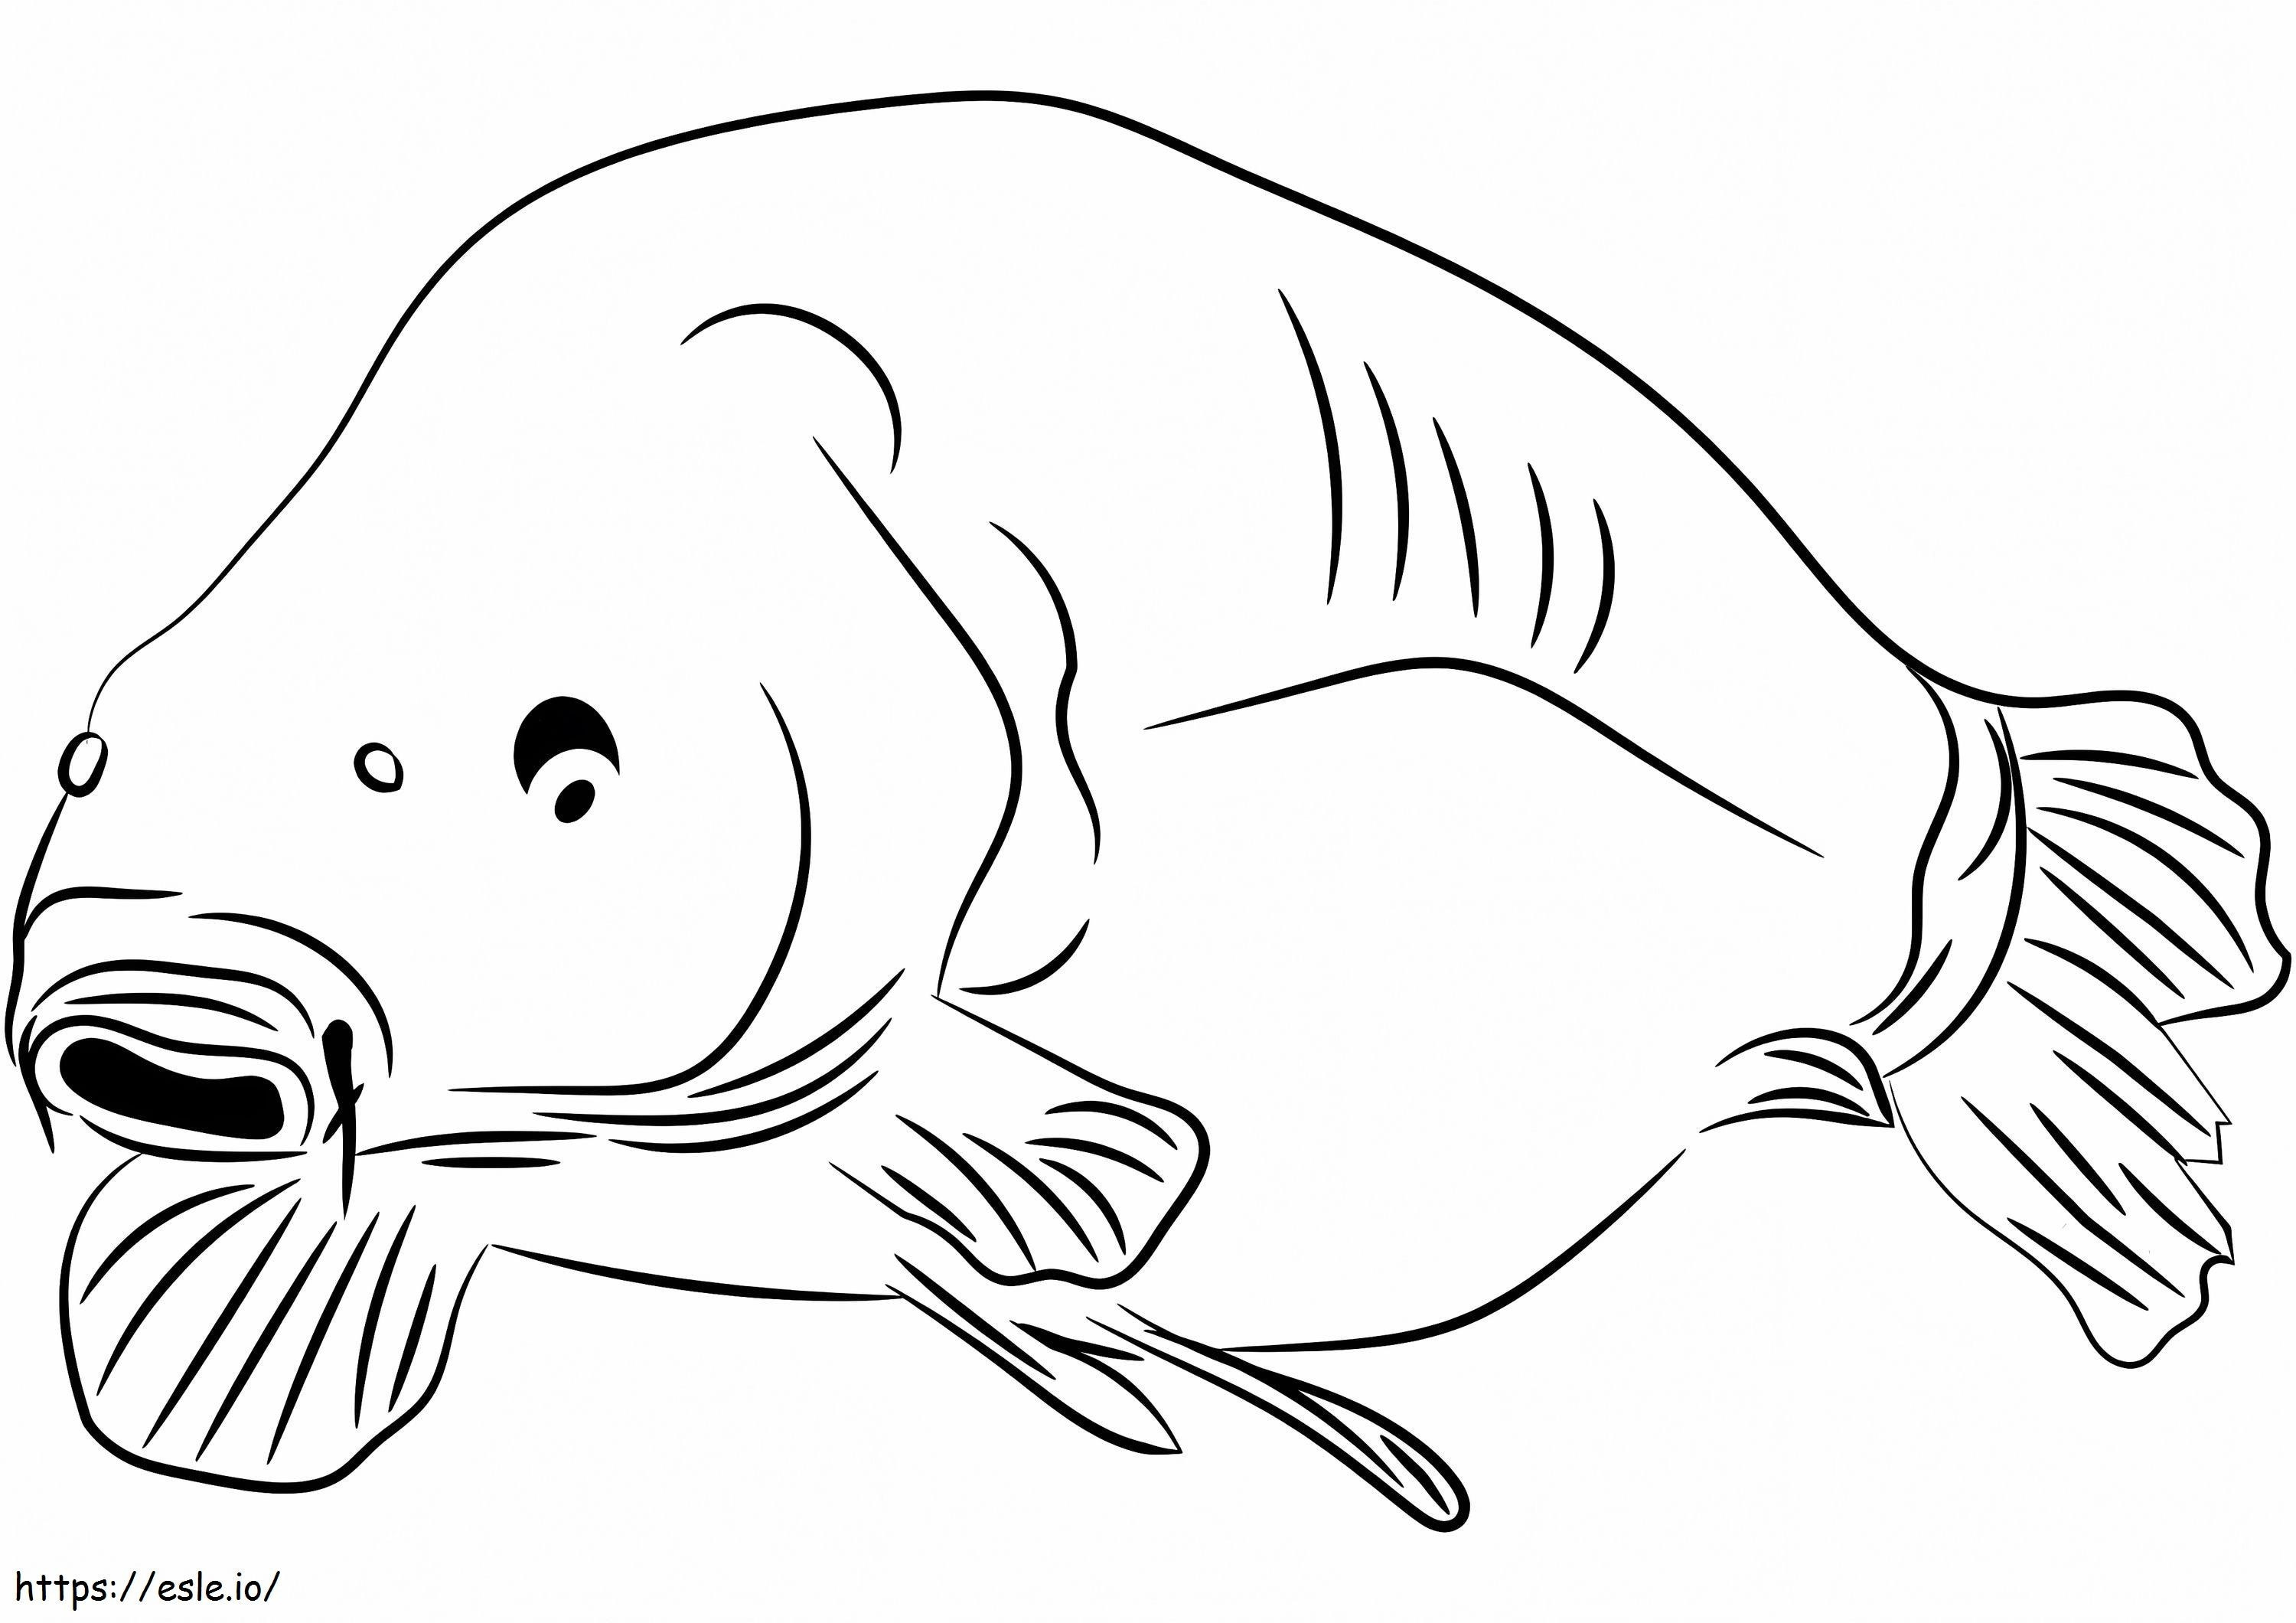 Simple Carp coloring page